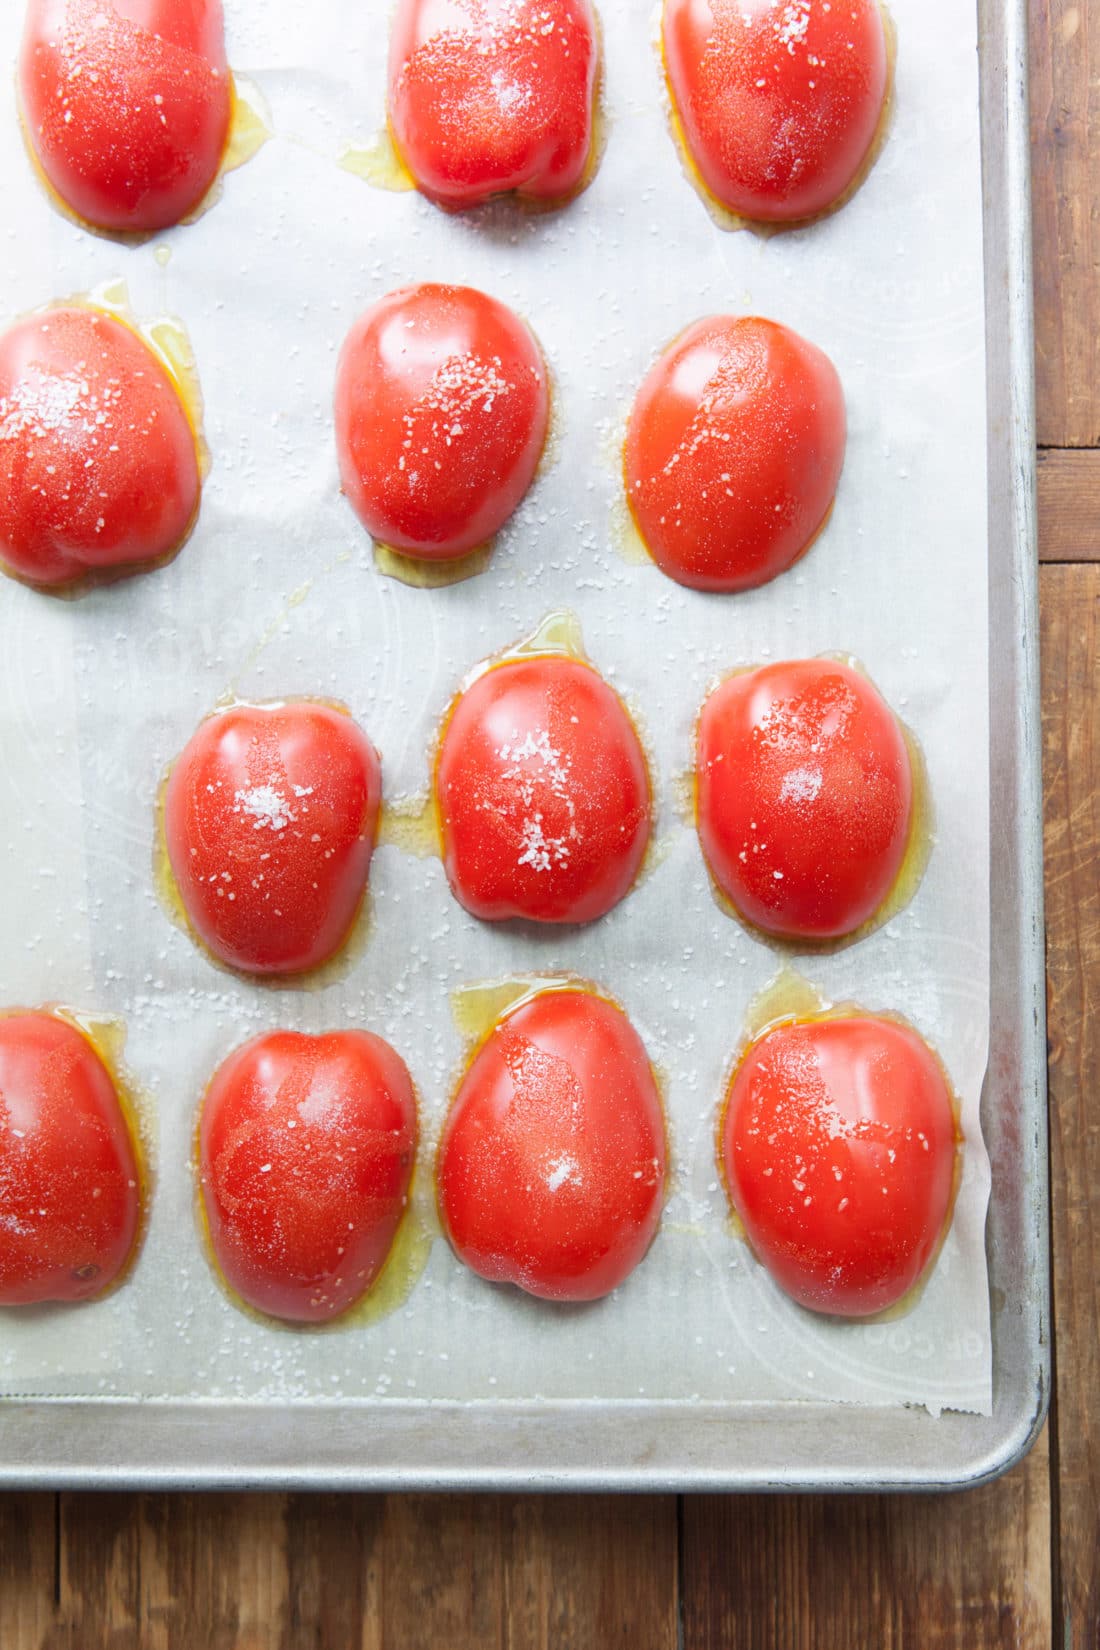 Lined baking sheet topped with halved tomatoes seasoned with olive oil and salt.